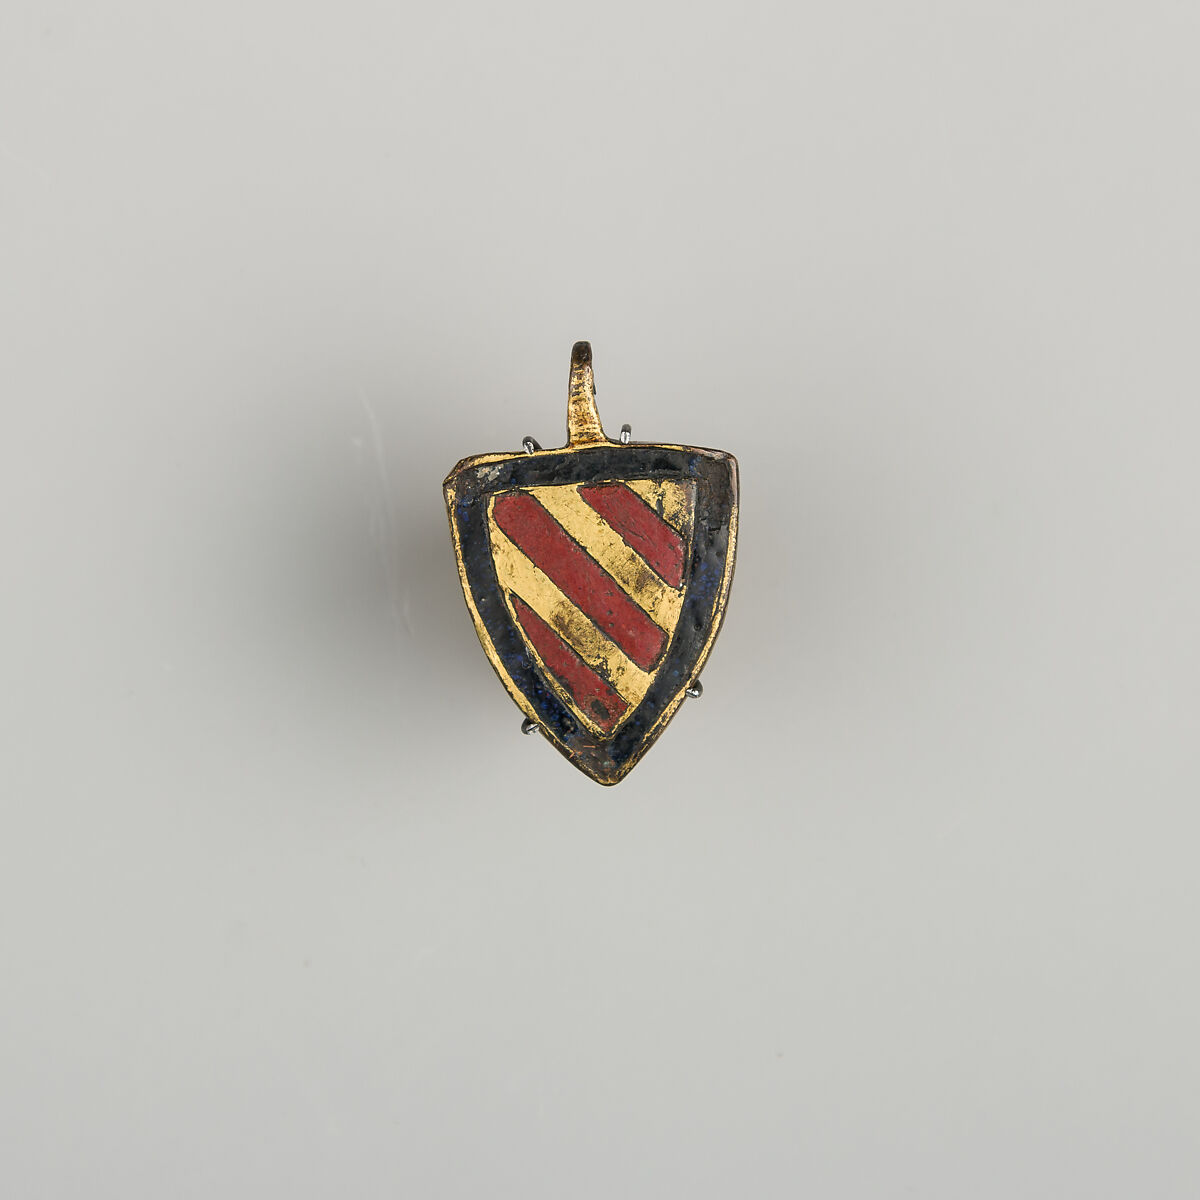 Pendant for Horse Trappings, Copper alloy, enamel, gold, Spanish 